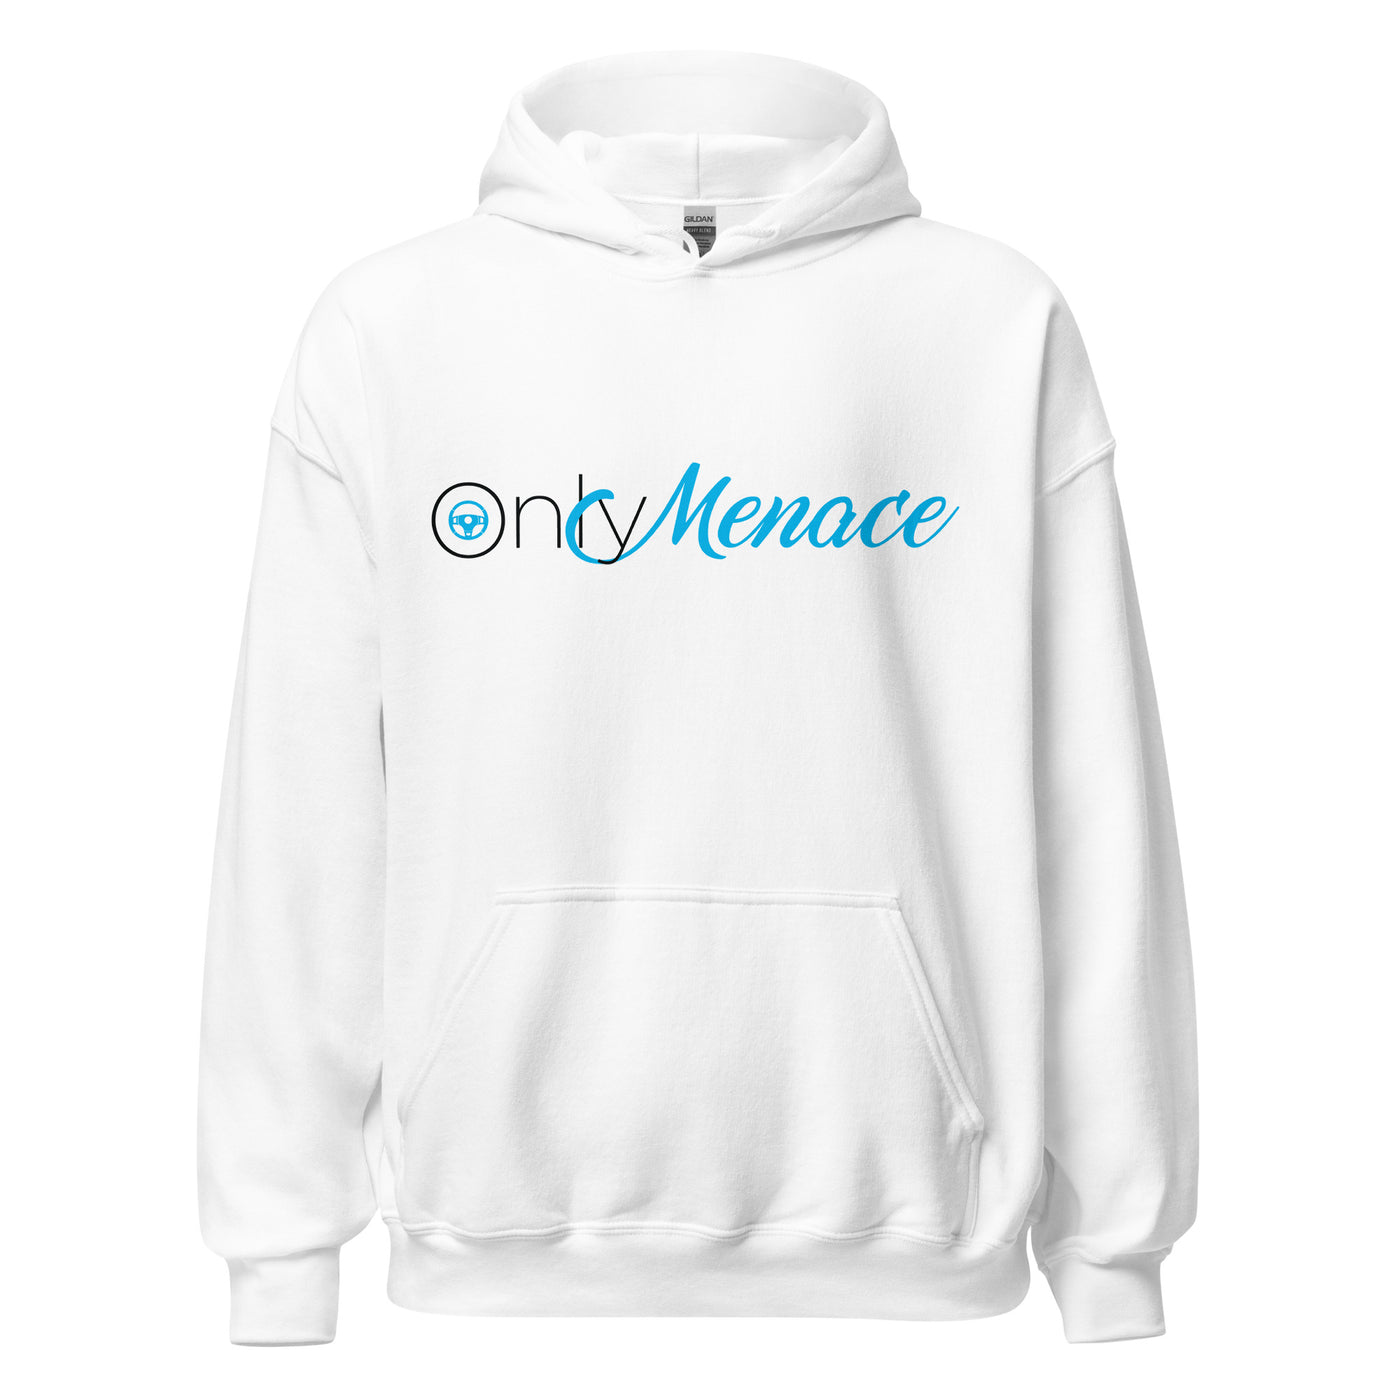 Only Menace Hoodie (White)